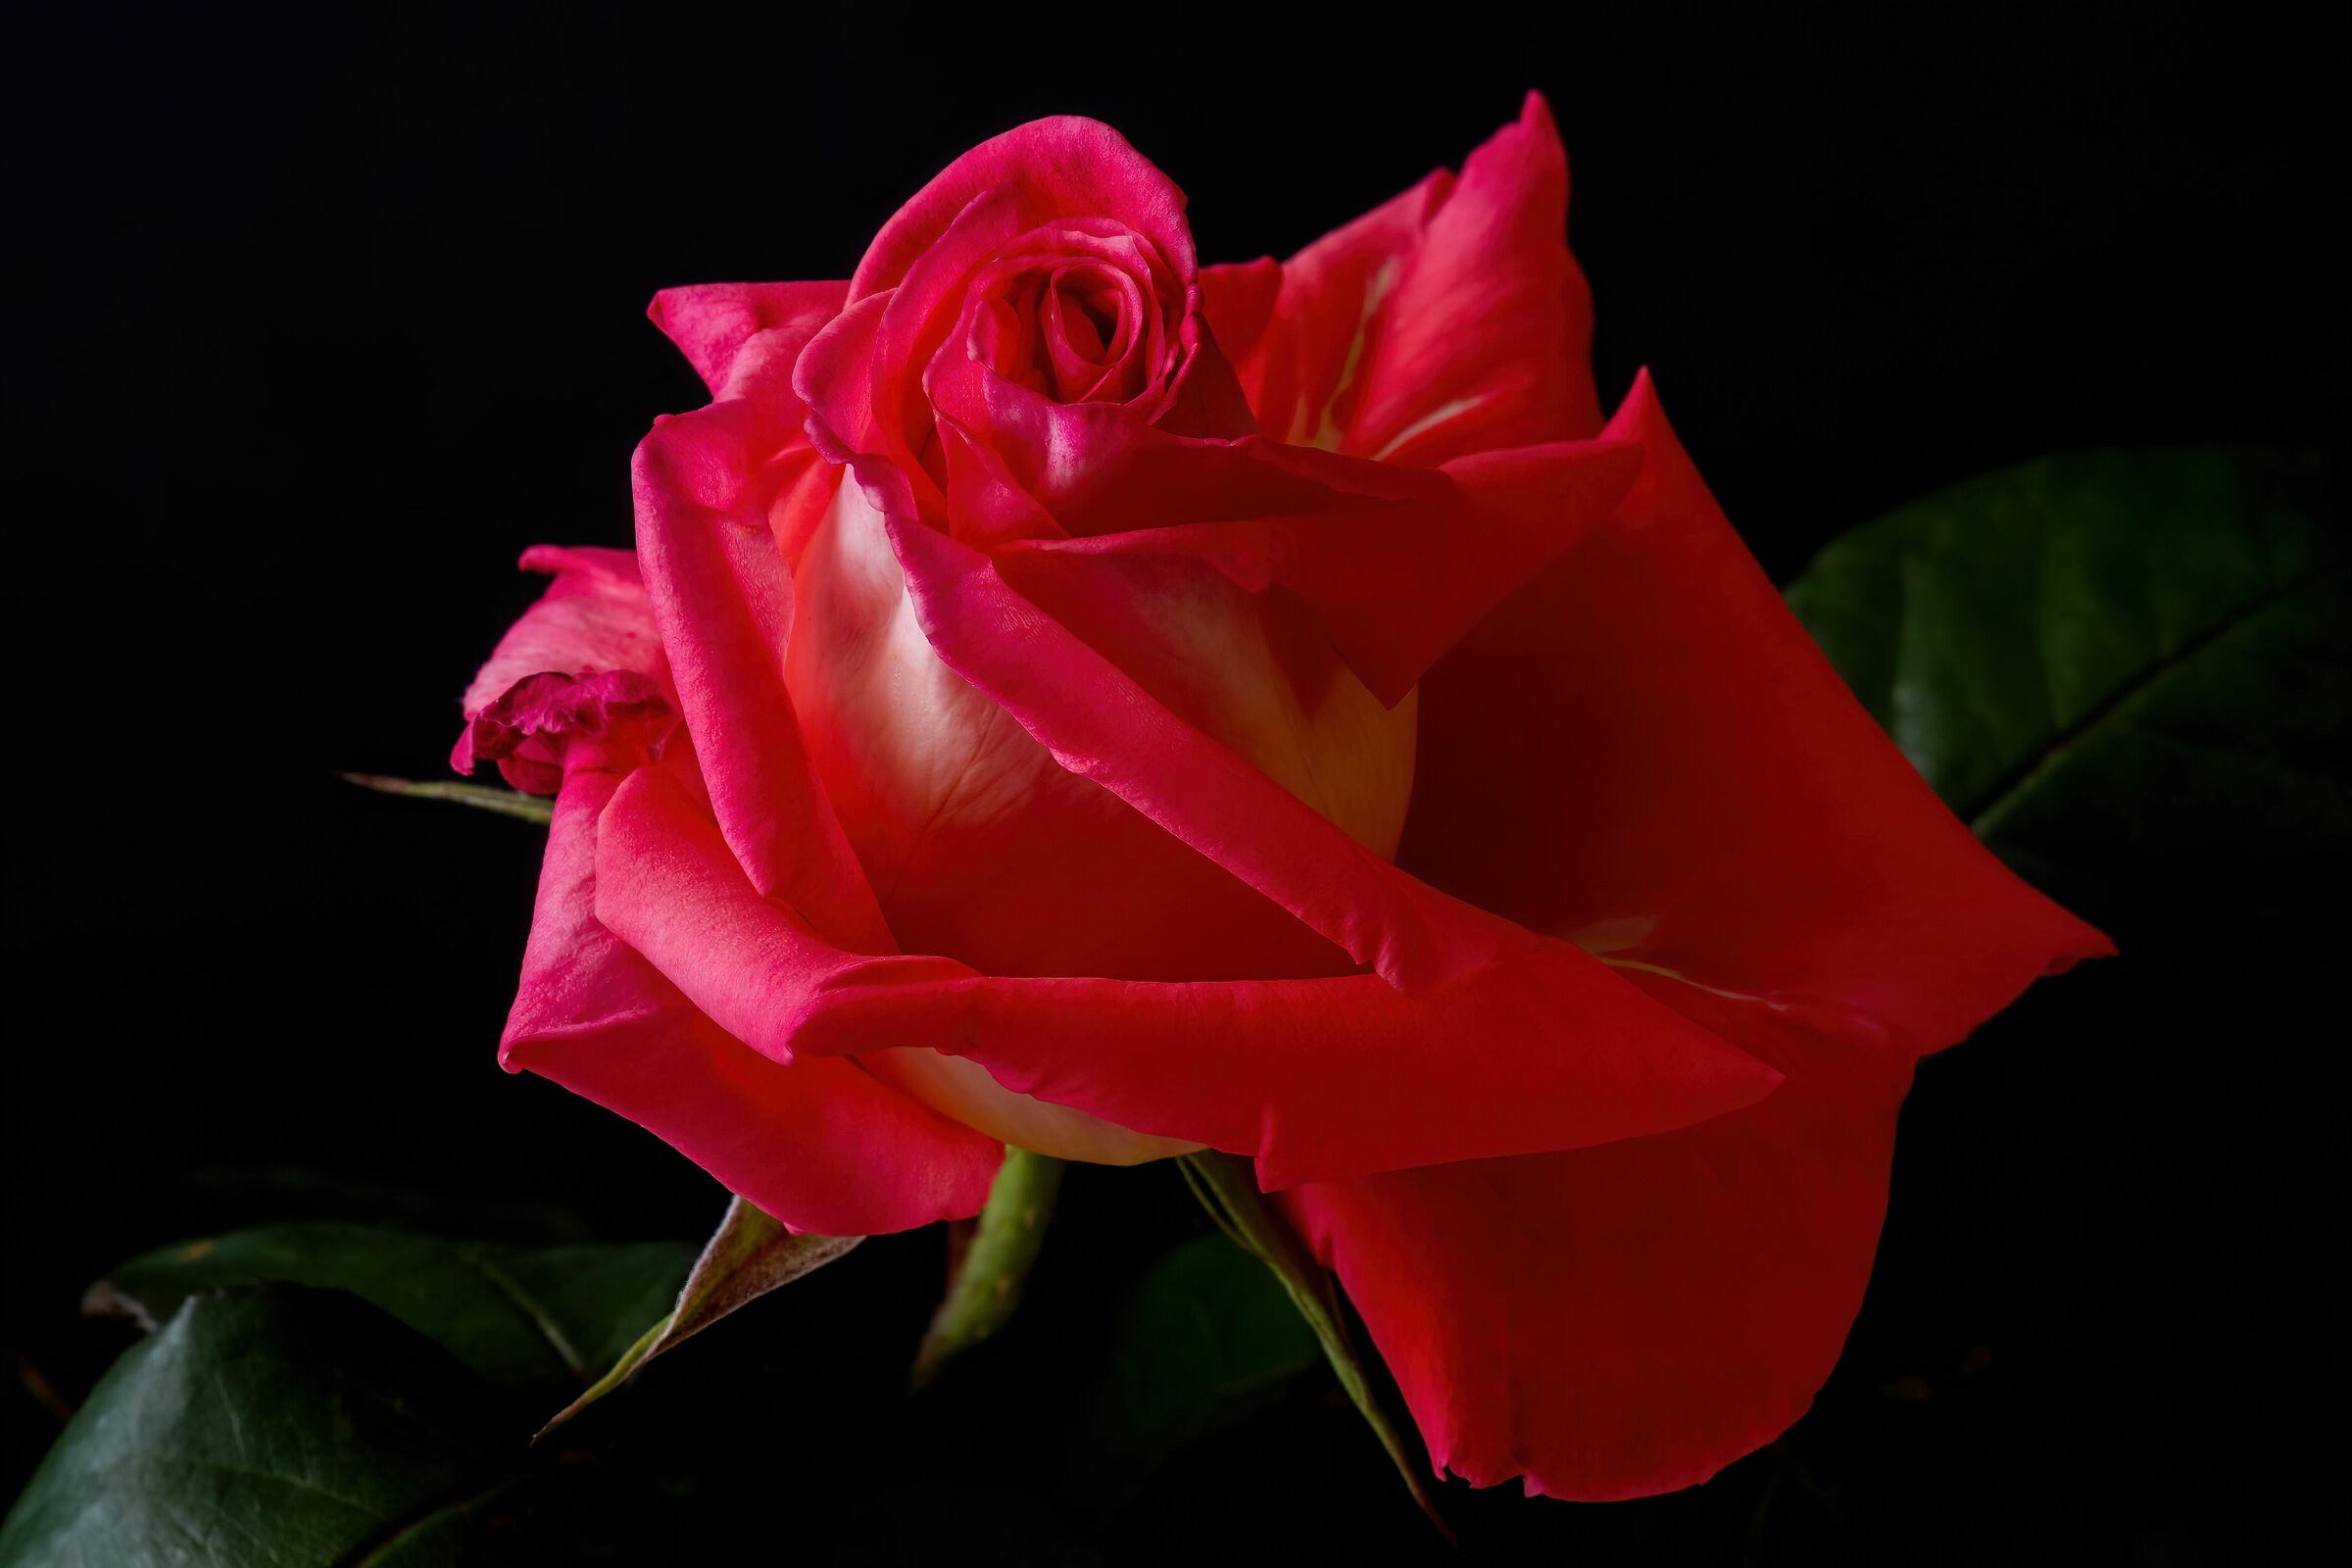 A rose for all moms...